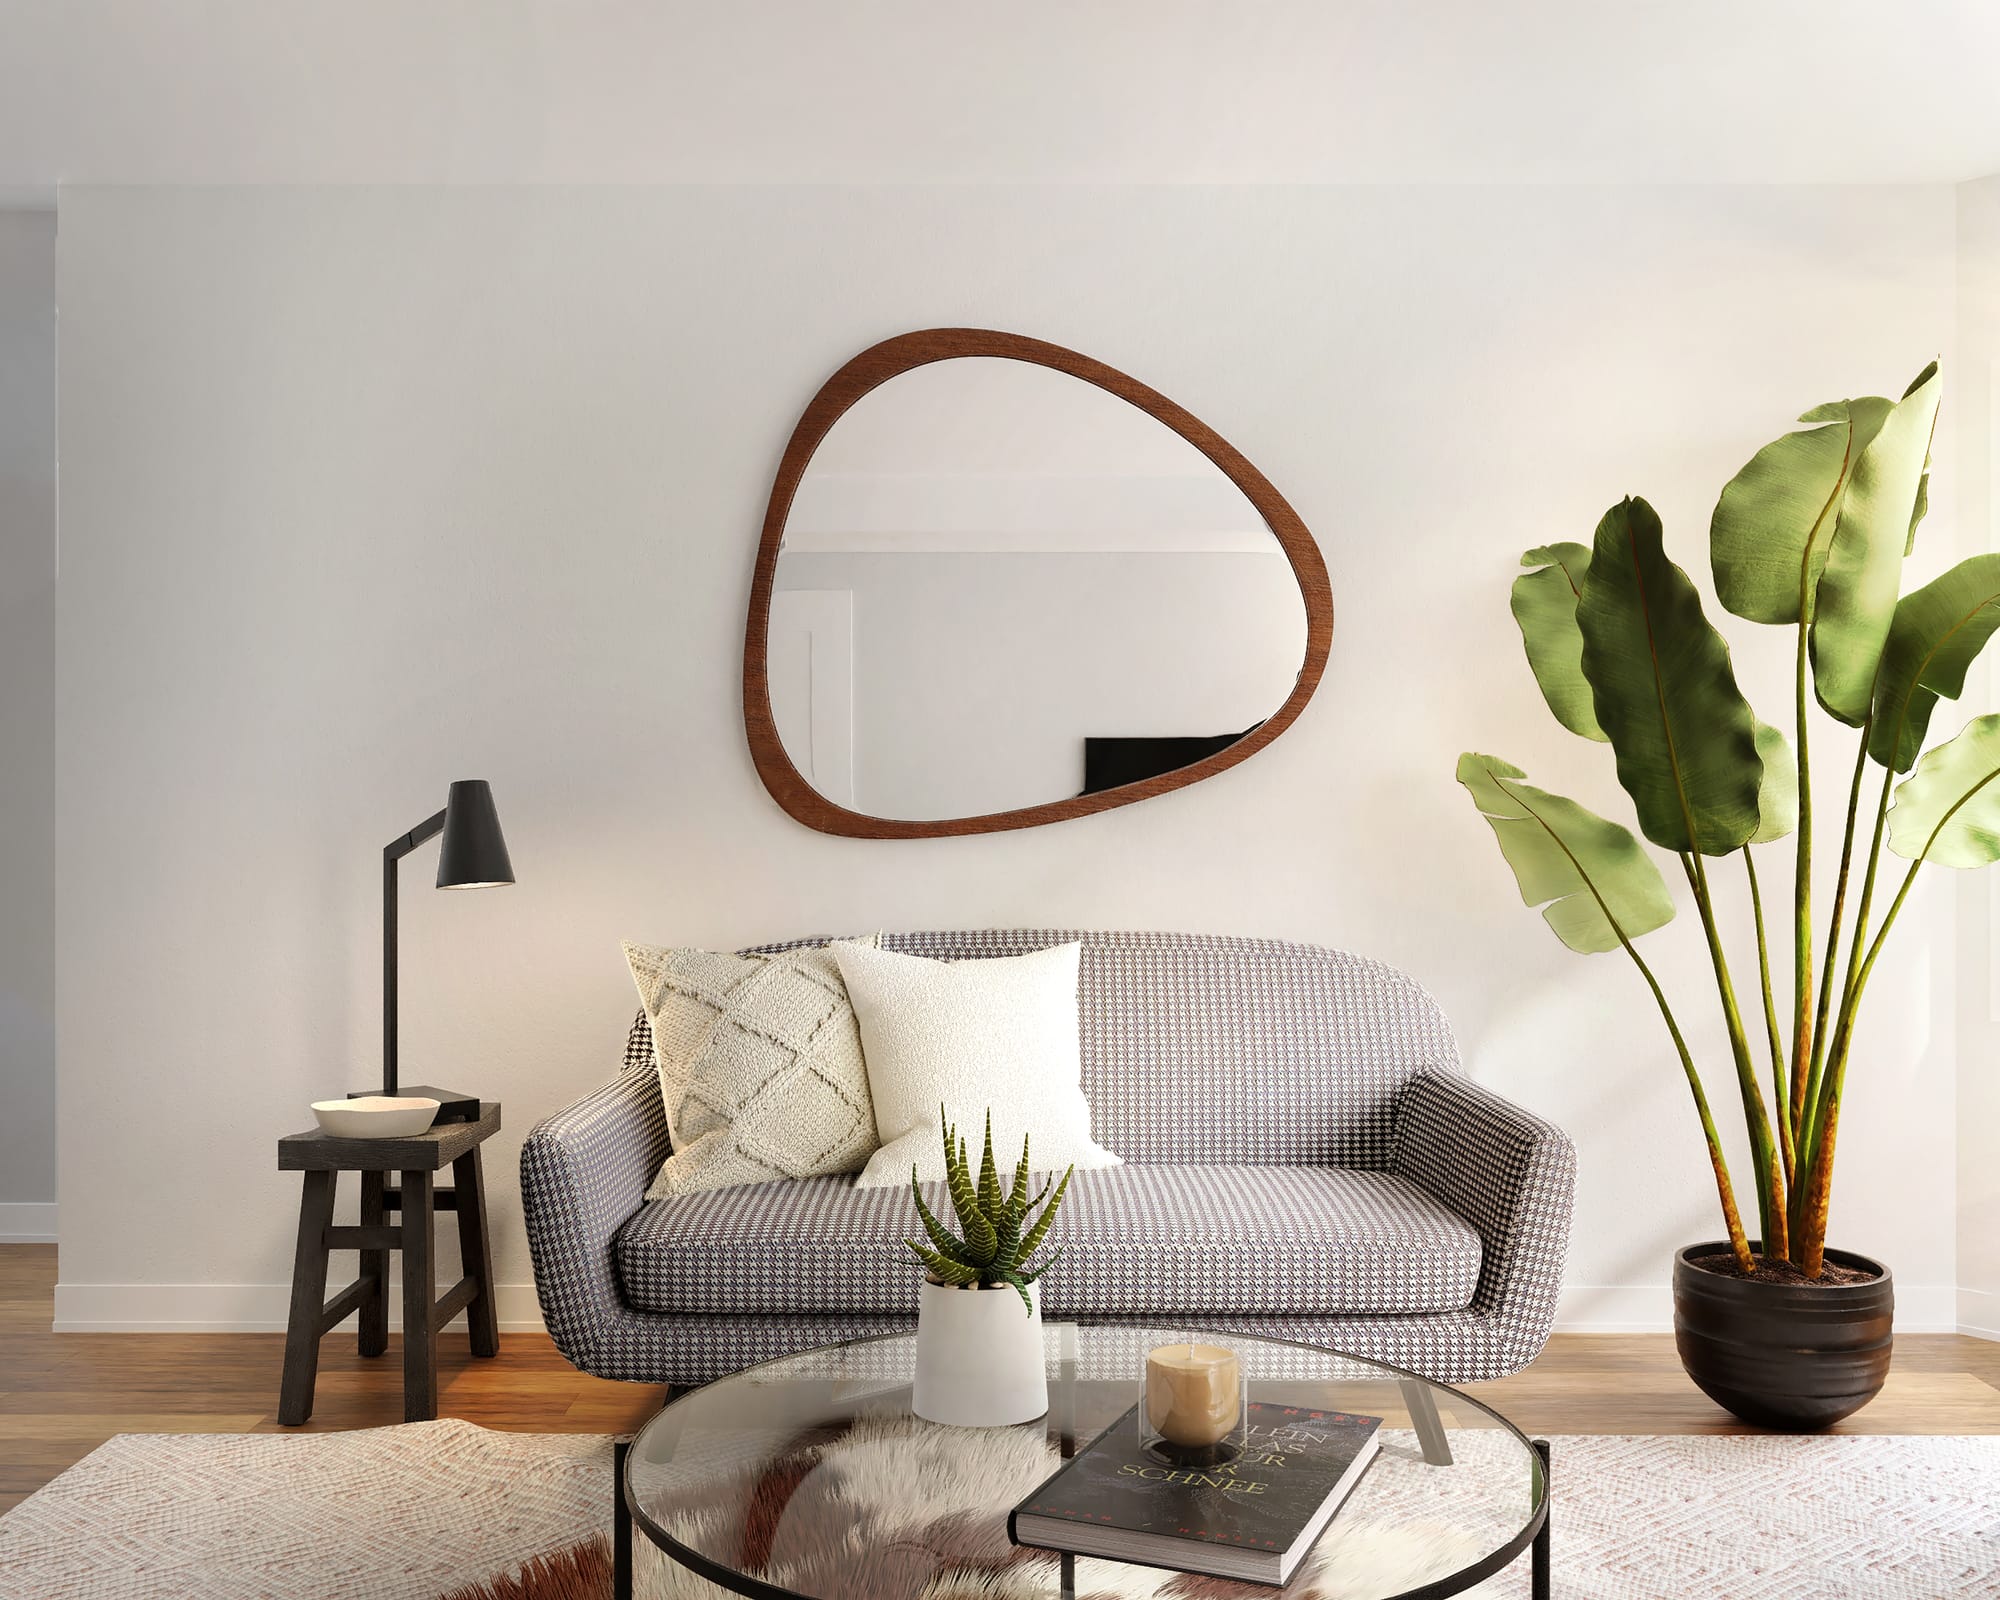 A living room with a funky mirror and plant